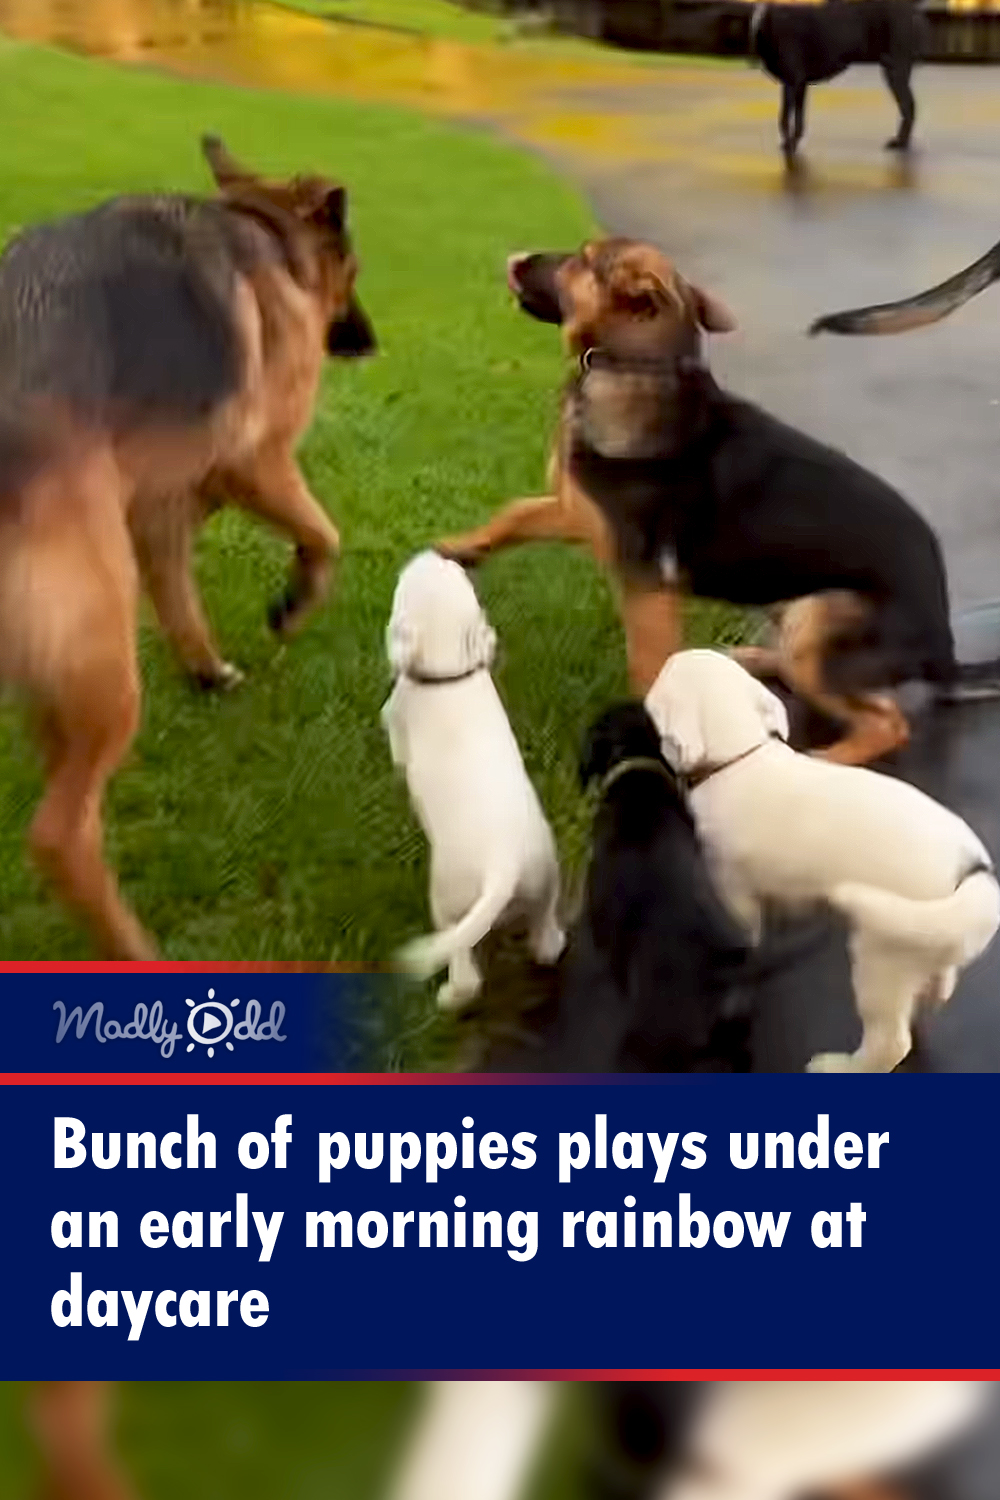 Bunch of puppies play under an early morning rainbow at daycare